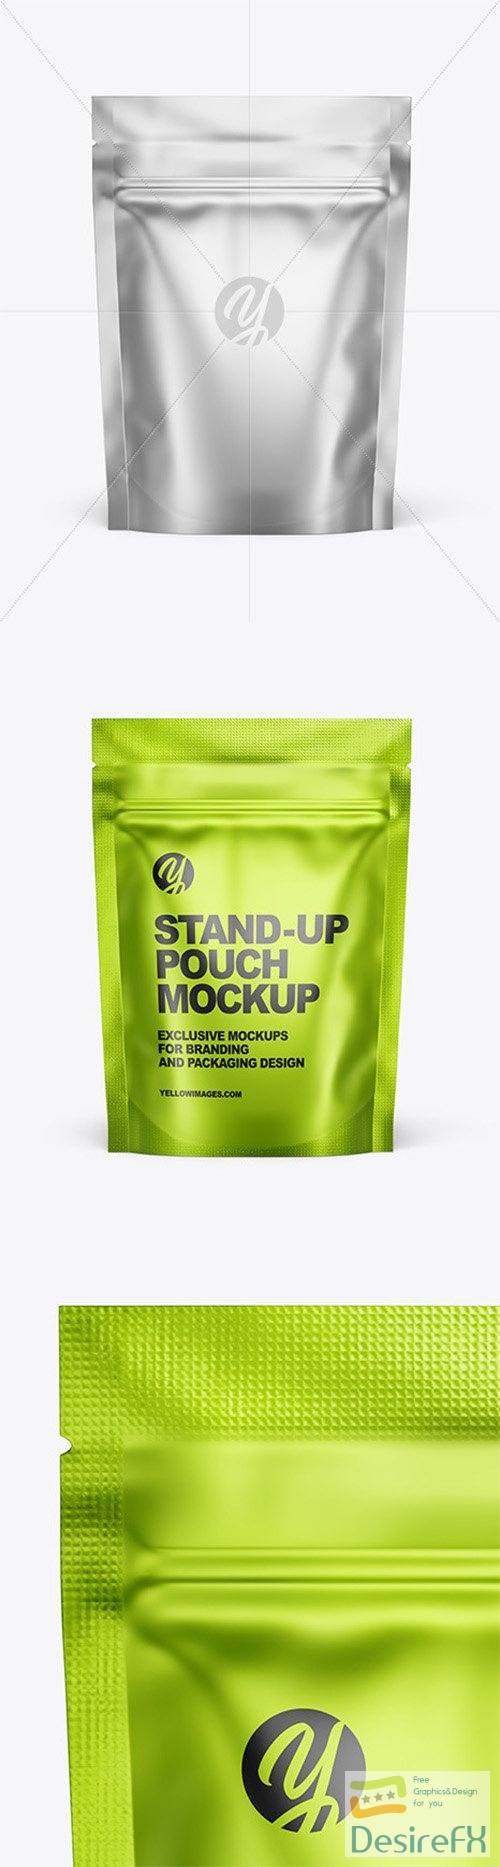 Metallic Stand-up Pouch Mockup 57563 TIF